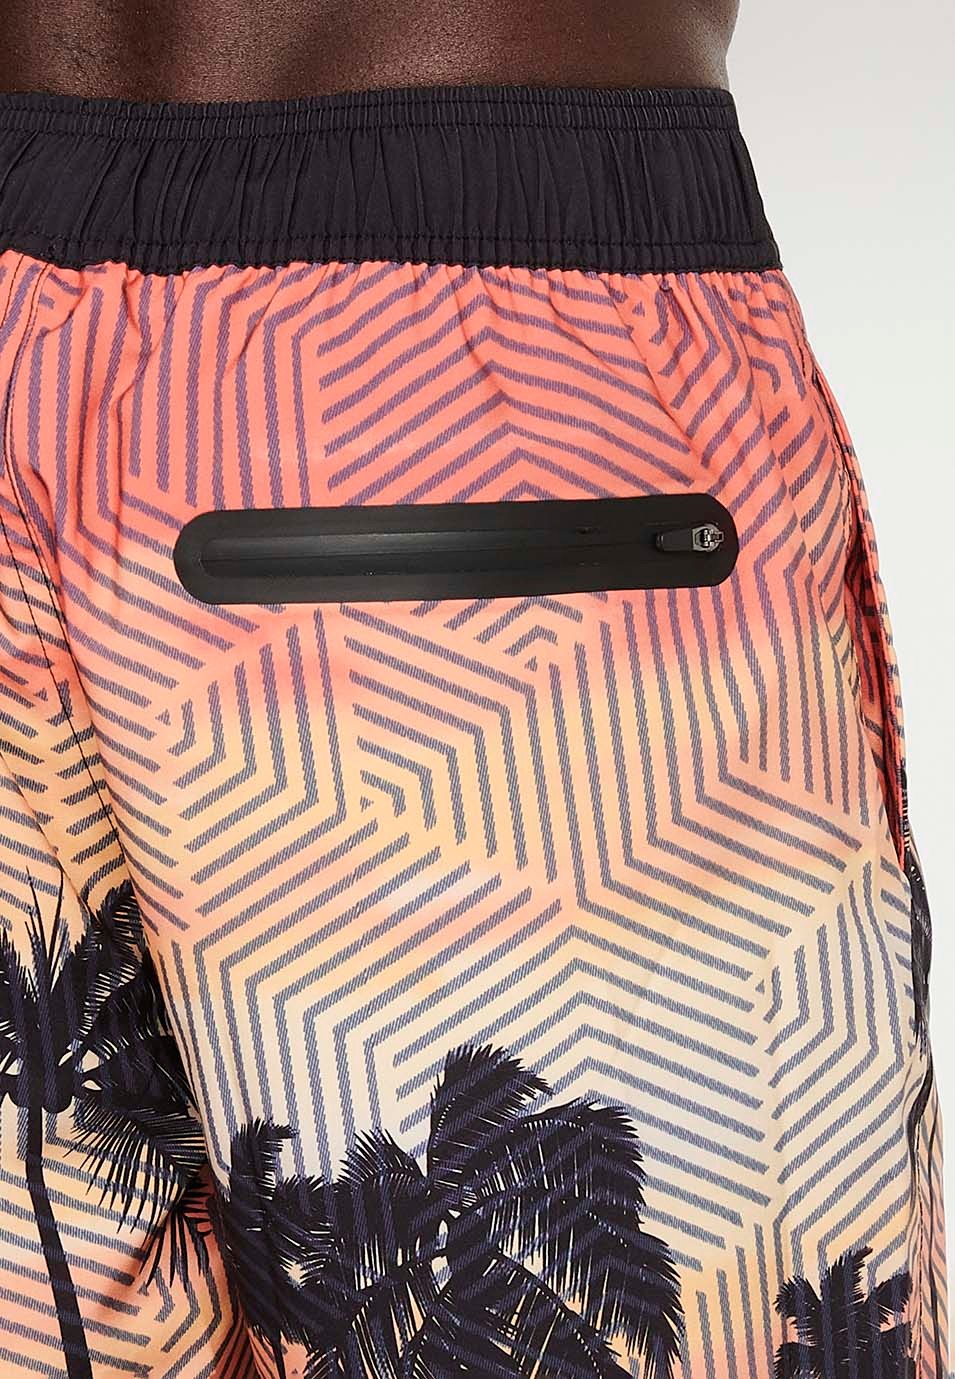 Printed swim shorts with adjustable waist, peach color for men